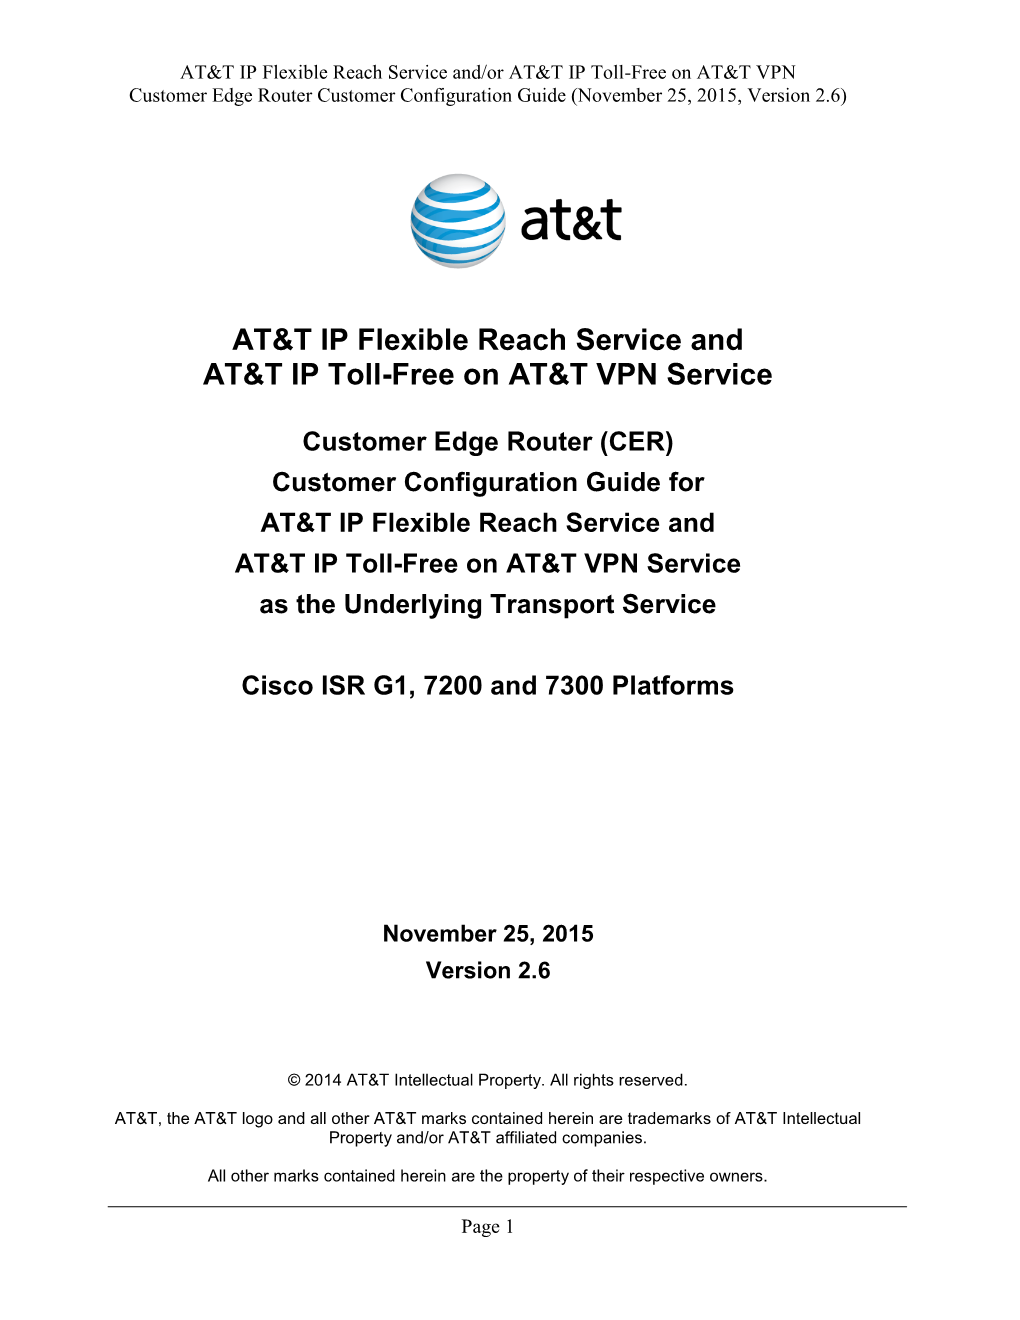 CE Router CCG for AT&T IP Flexible Reach and IP Toll-Free Over AVPN